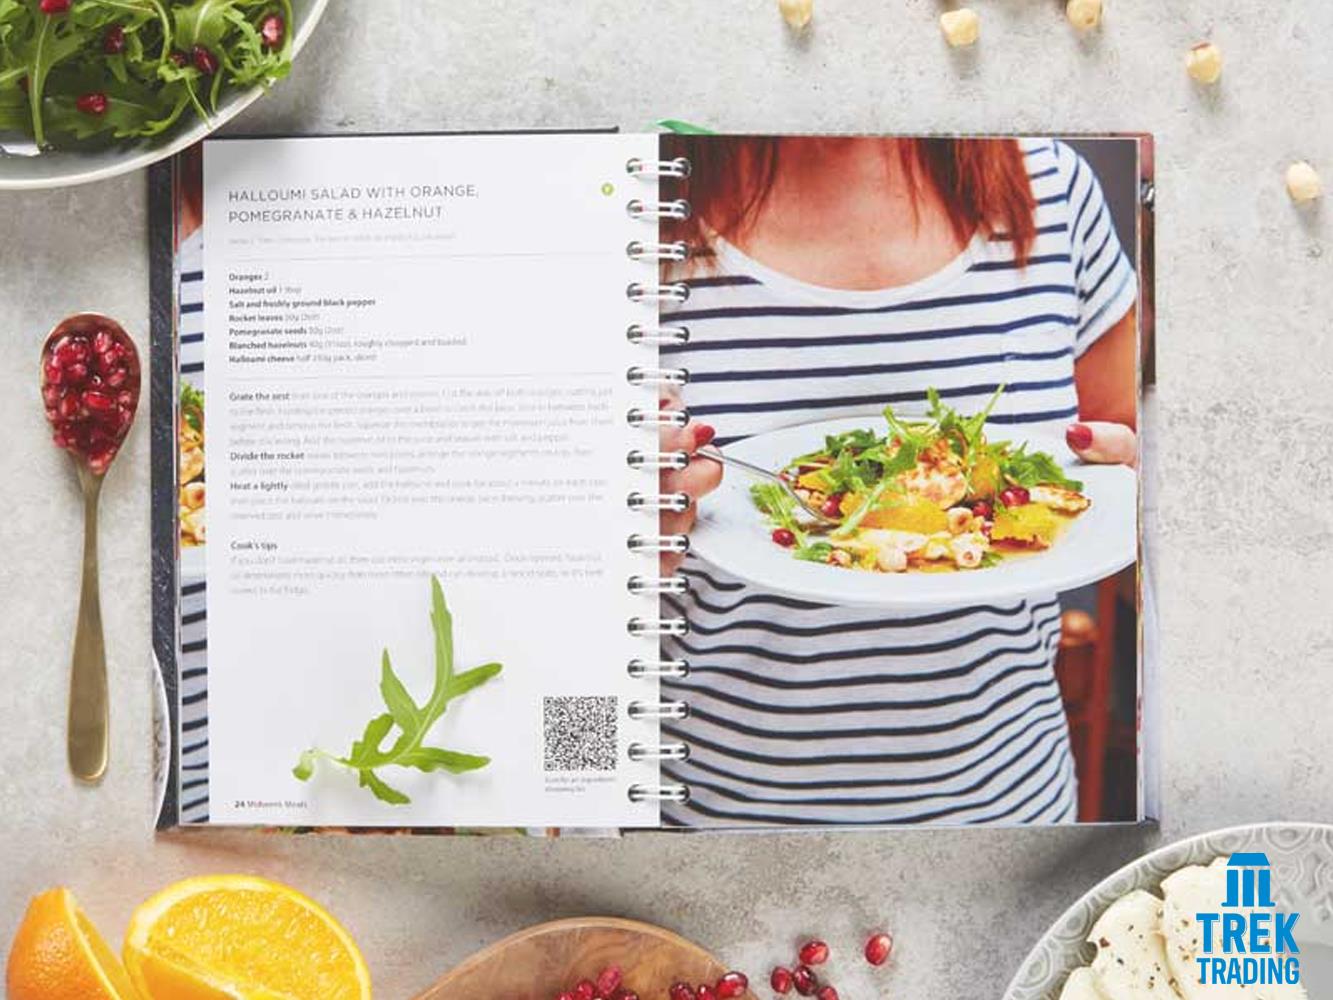 The Quick After Work Cookbook from Dairy Diary